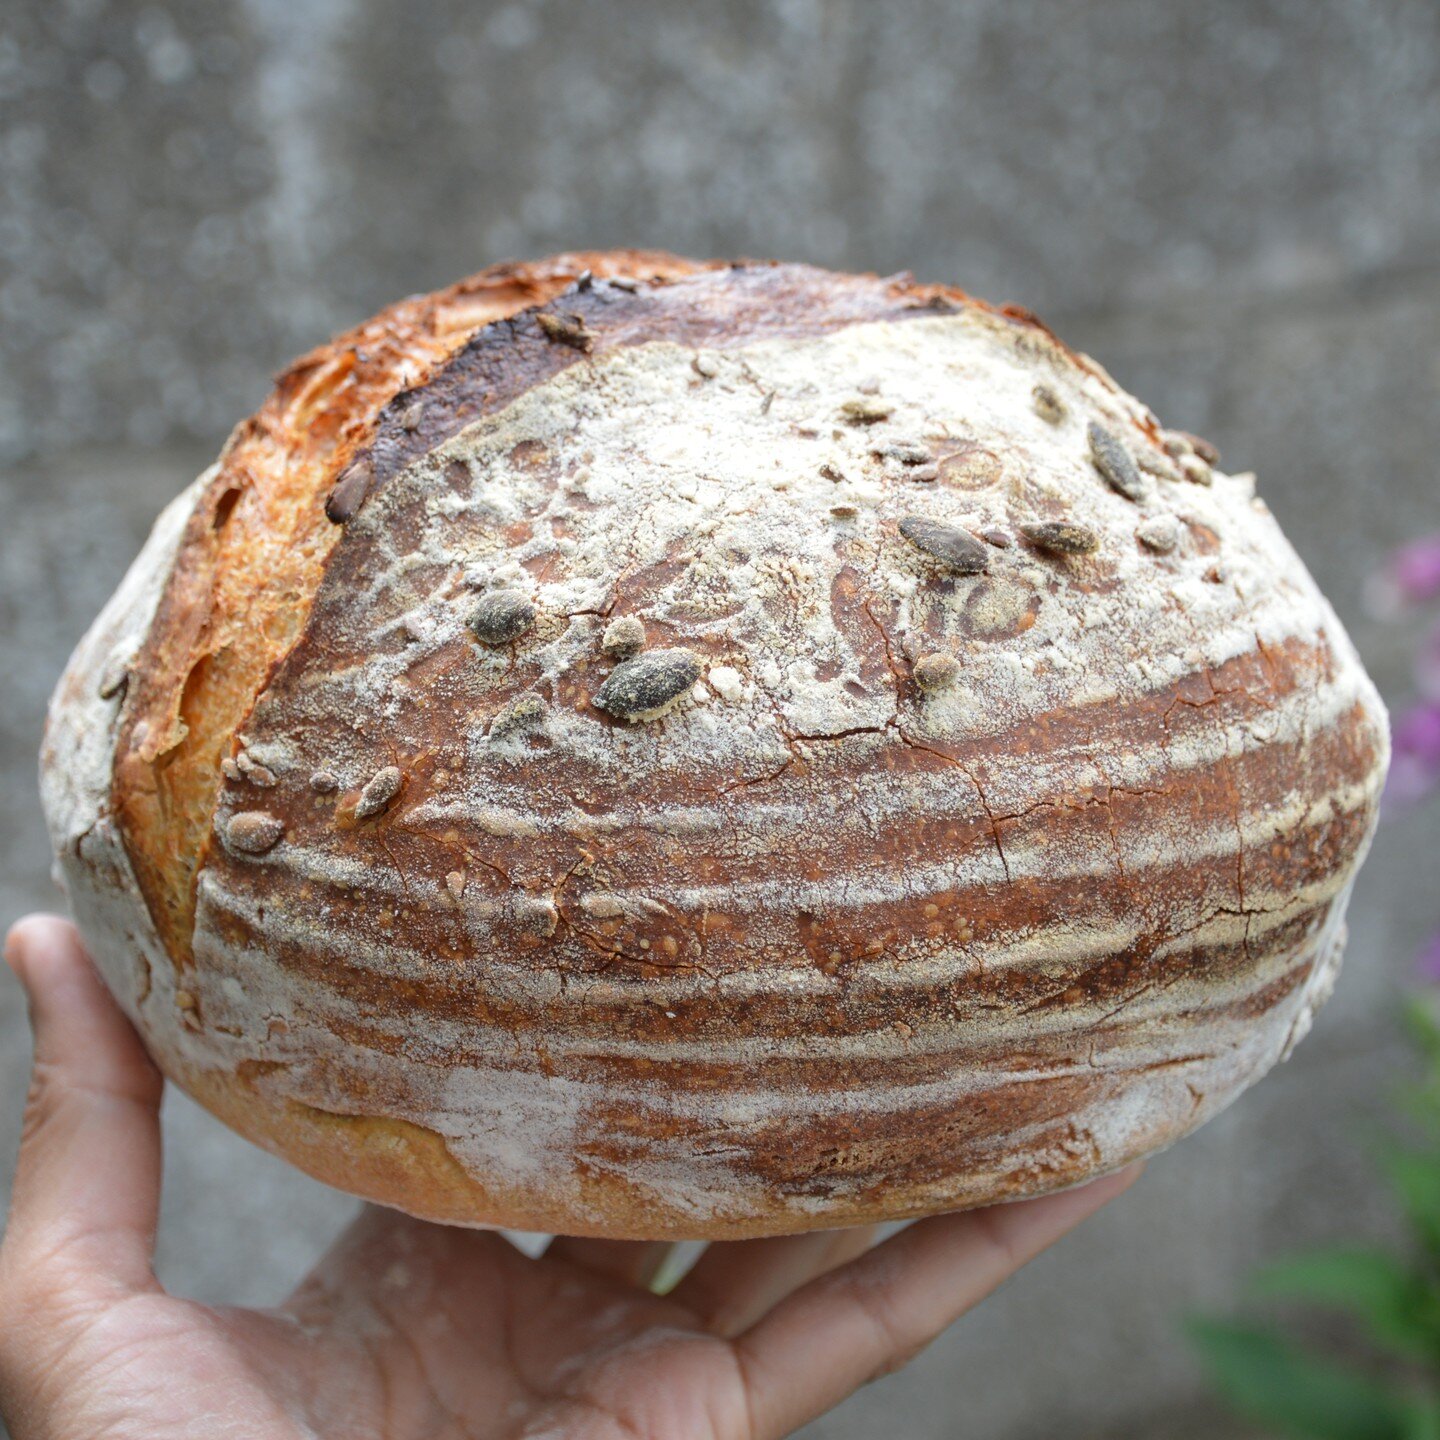 After a long hiatus, I'm back sourbaking with a vengence. Probably my prettiest boule, thanks to the generous gift of a proofing basket from @lifebeginsatfortytwo. A gift to a neighbour recovering from surgery.
.
.
.
#sourdough #wildyeast #proofingba